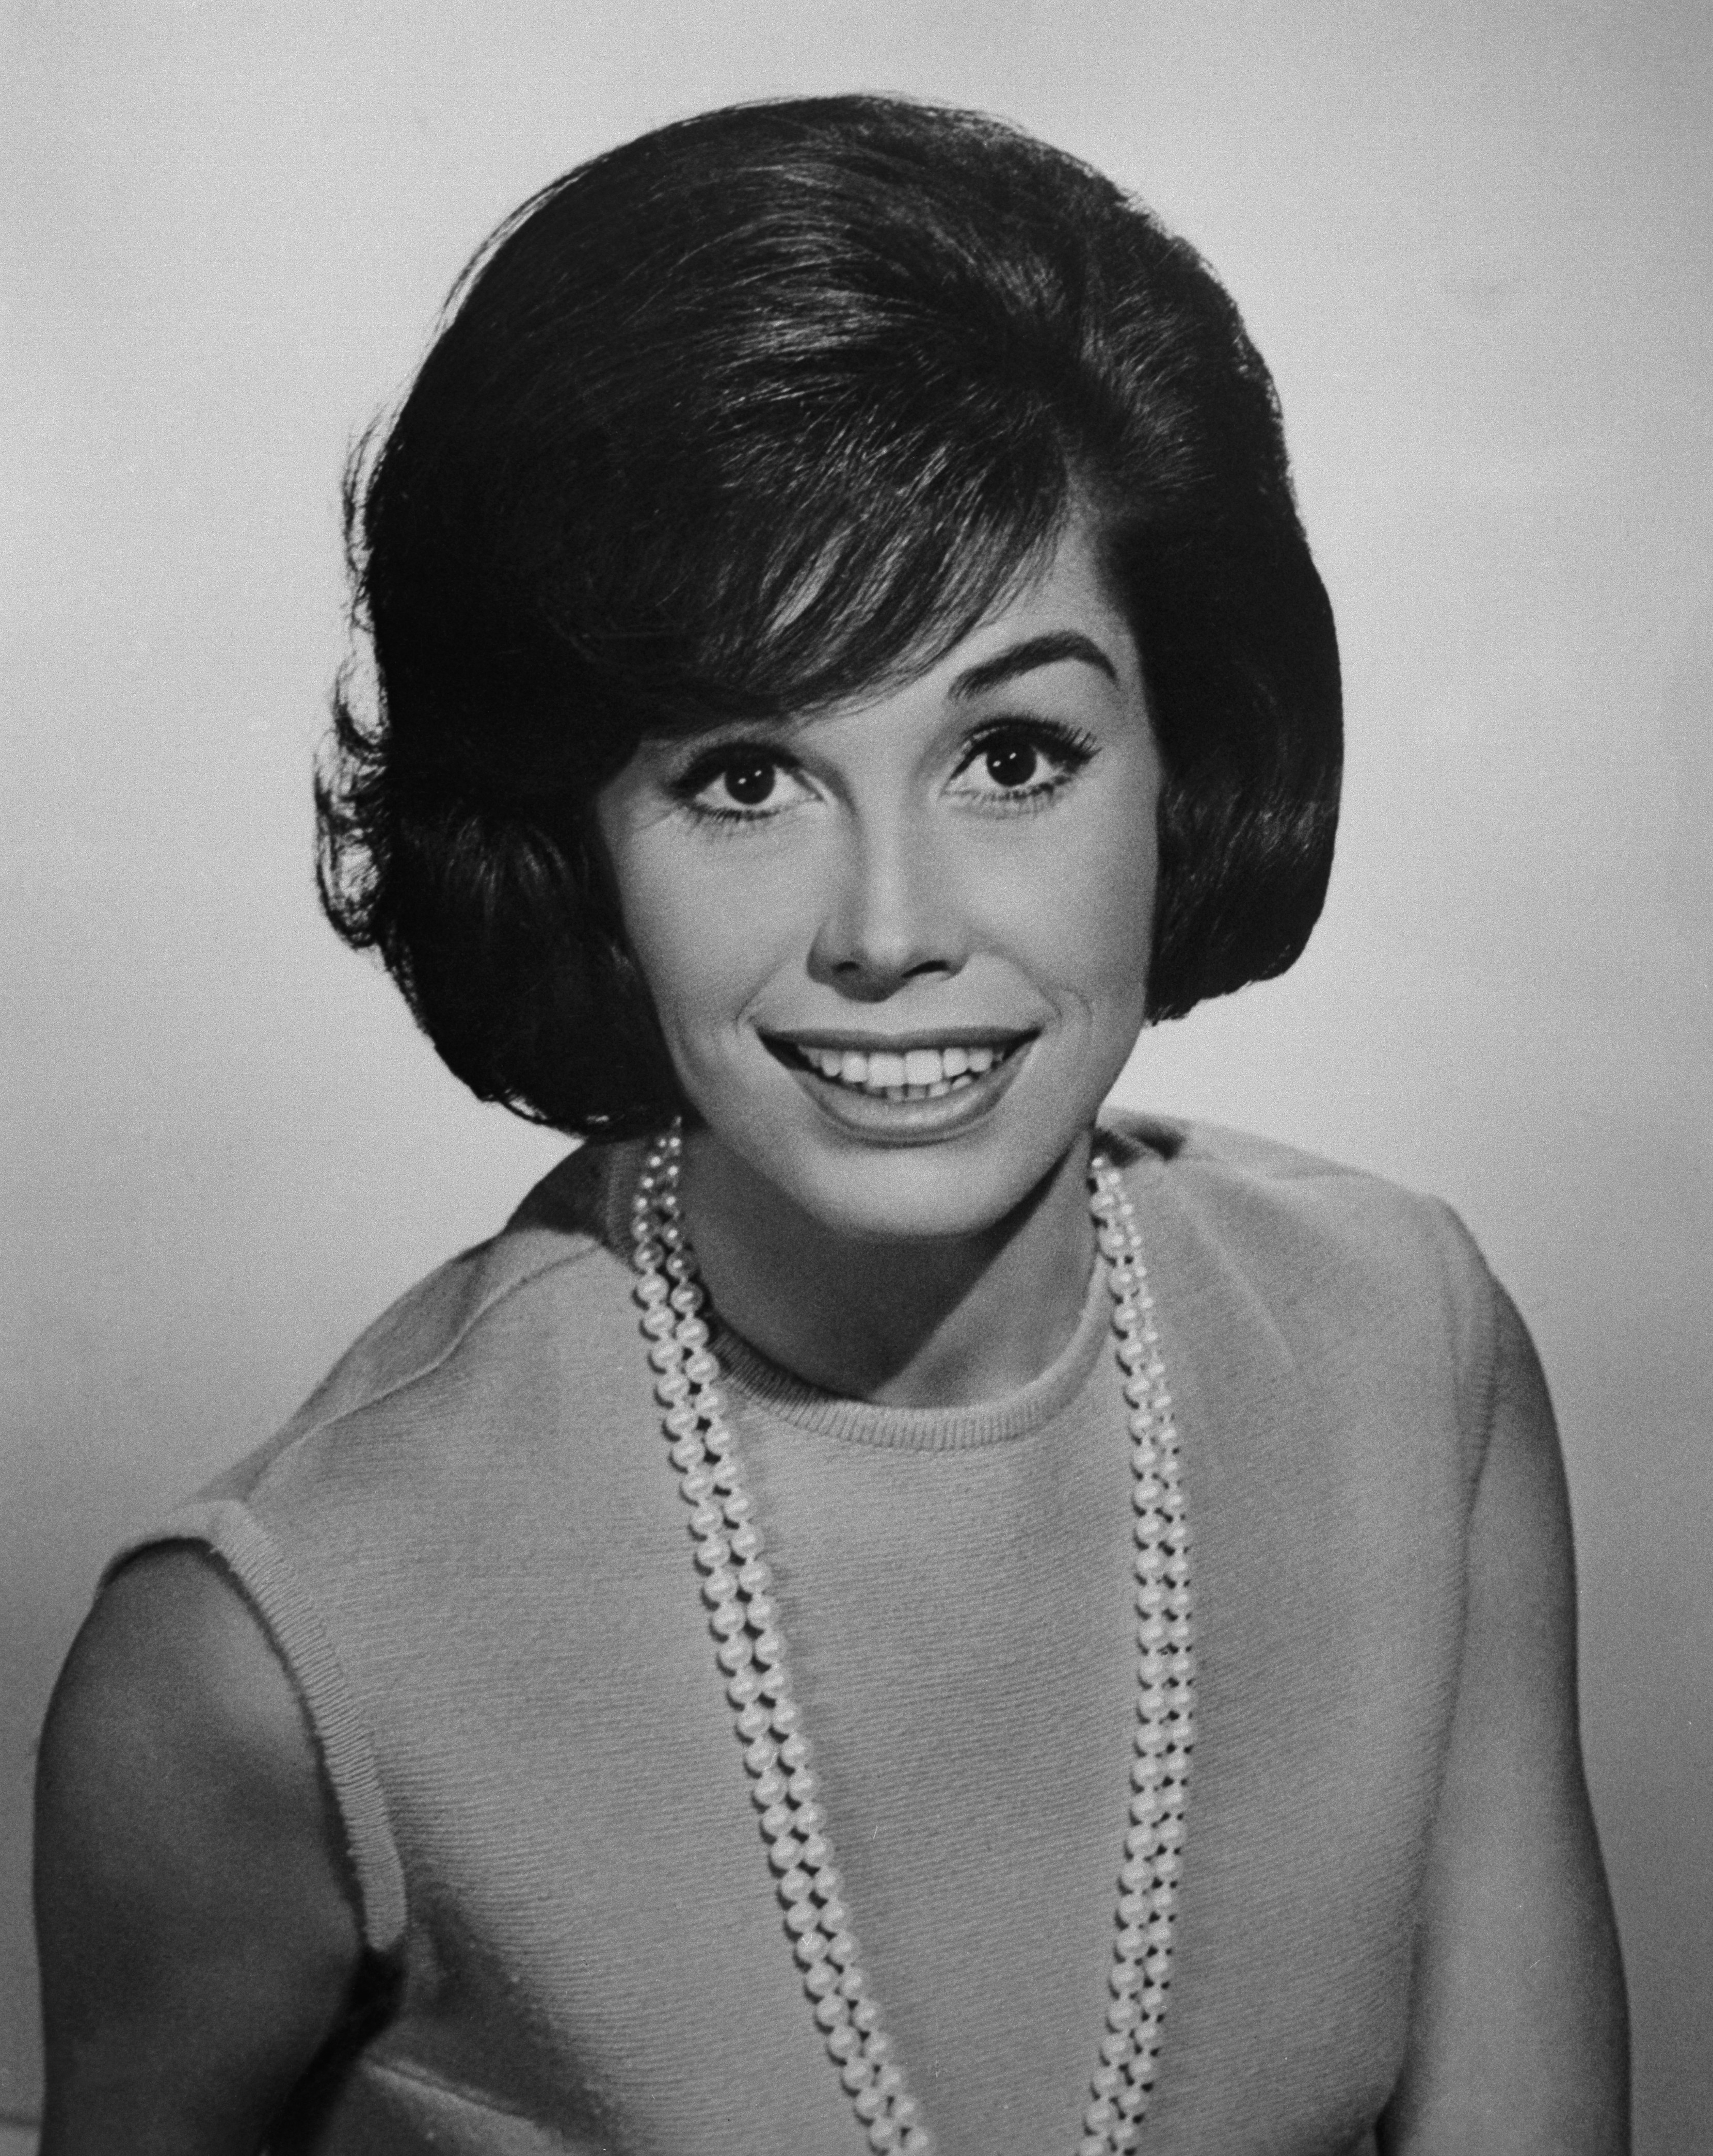 Publicity handout of television actress Mary Tyler Moore (1936- 2017), circa 1970. | Source: Getty Images